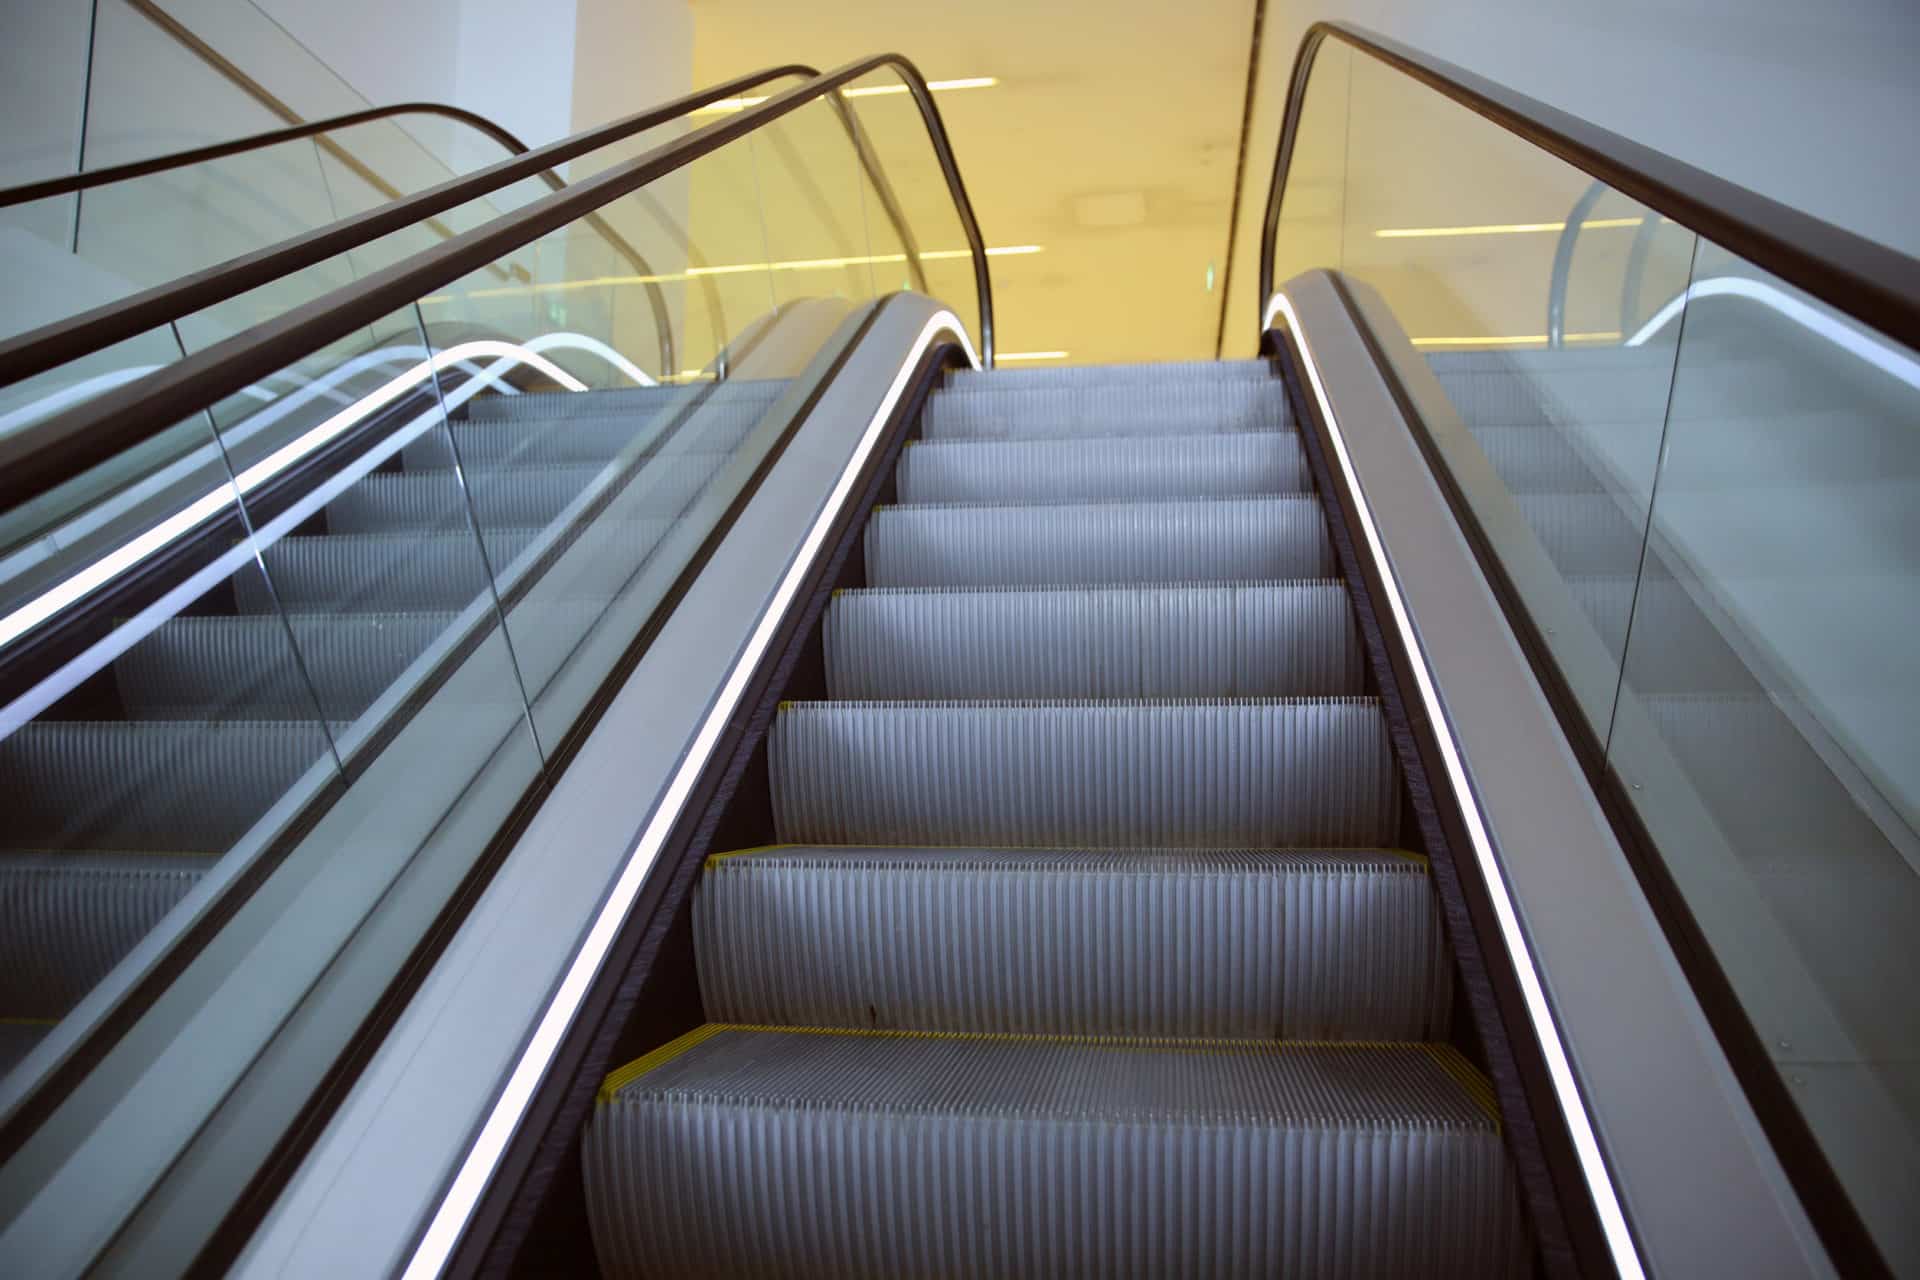 How to Avoid a NY Escalator Accident -- Even If One Is Malfunctioning